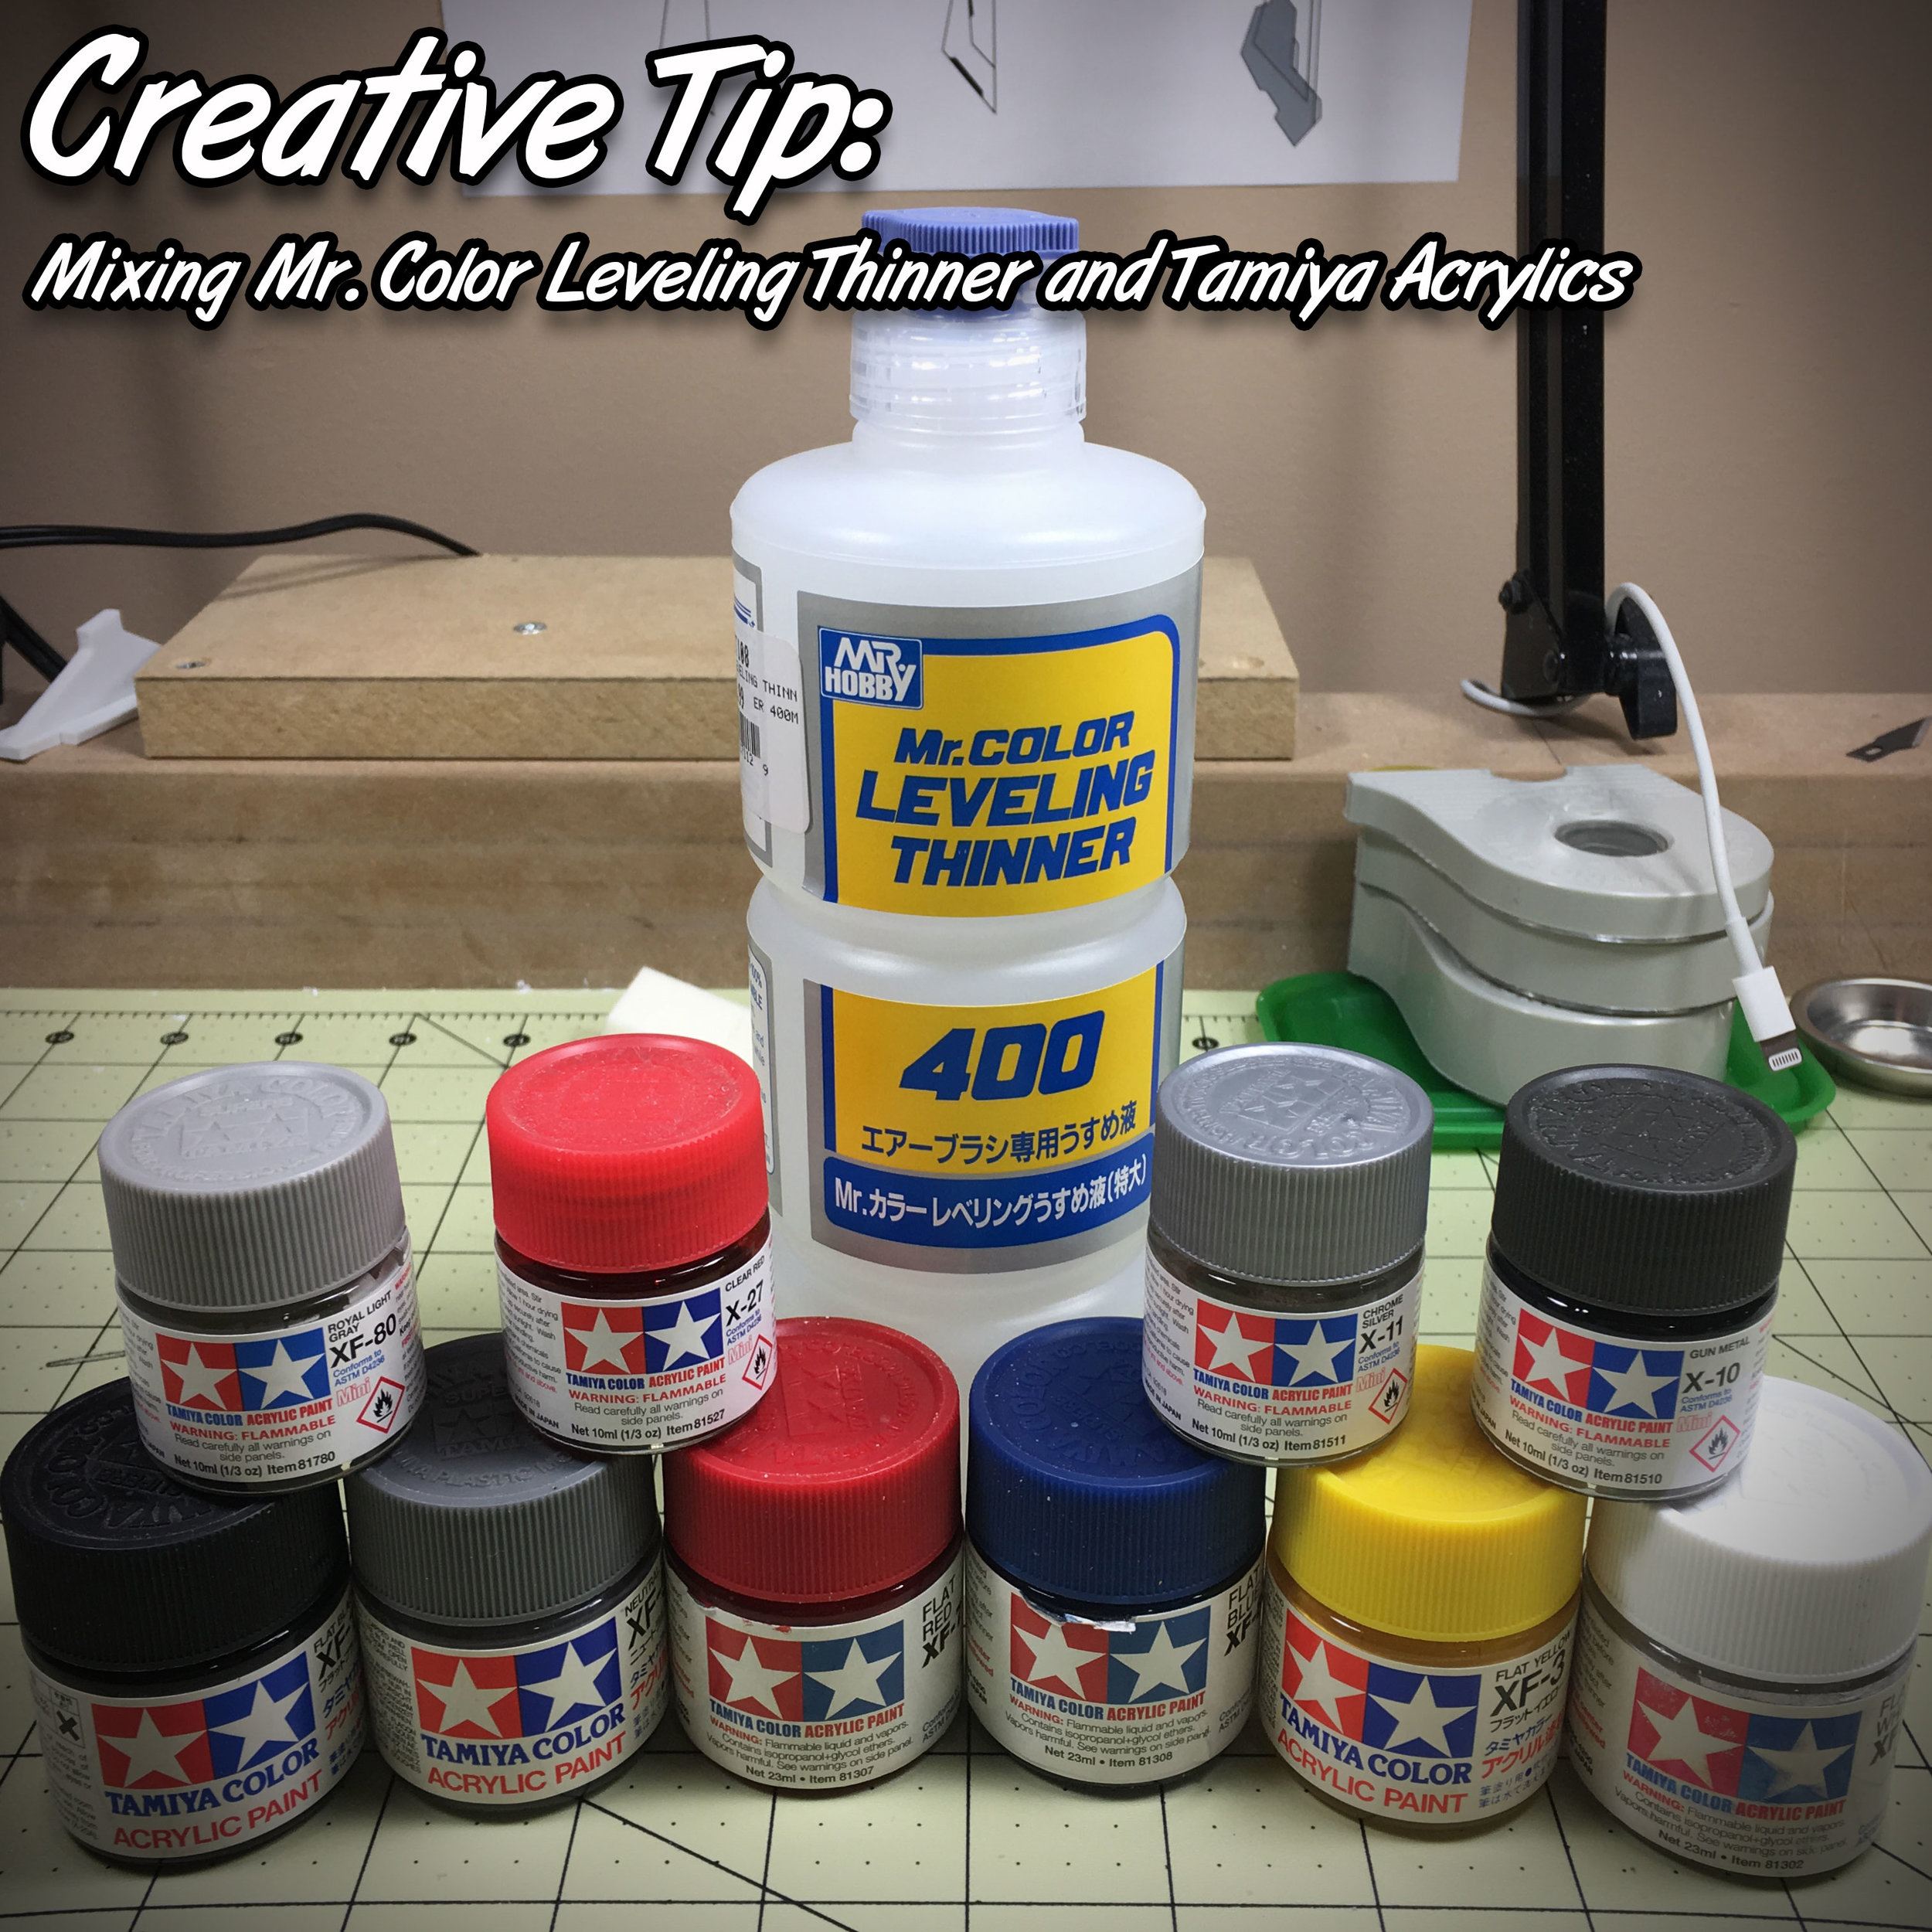 Creative Tip: Mixing Mr. Color Leveling Thinner with Tamiya